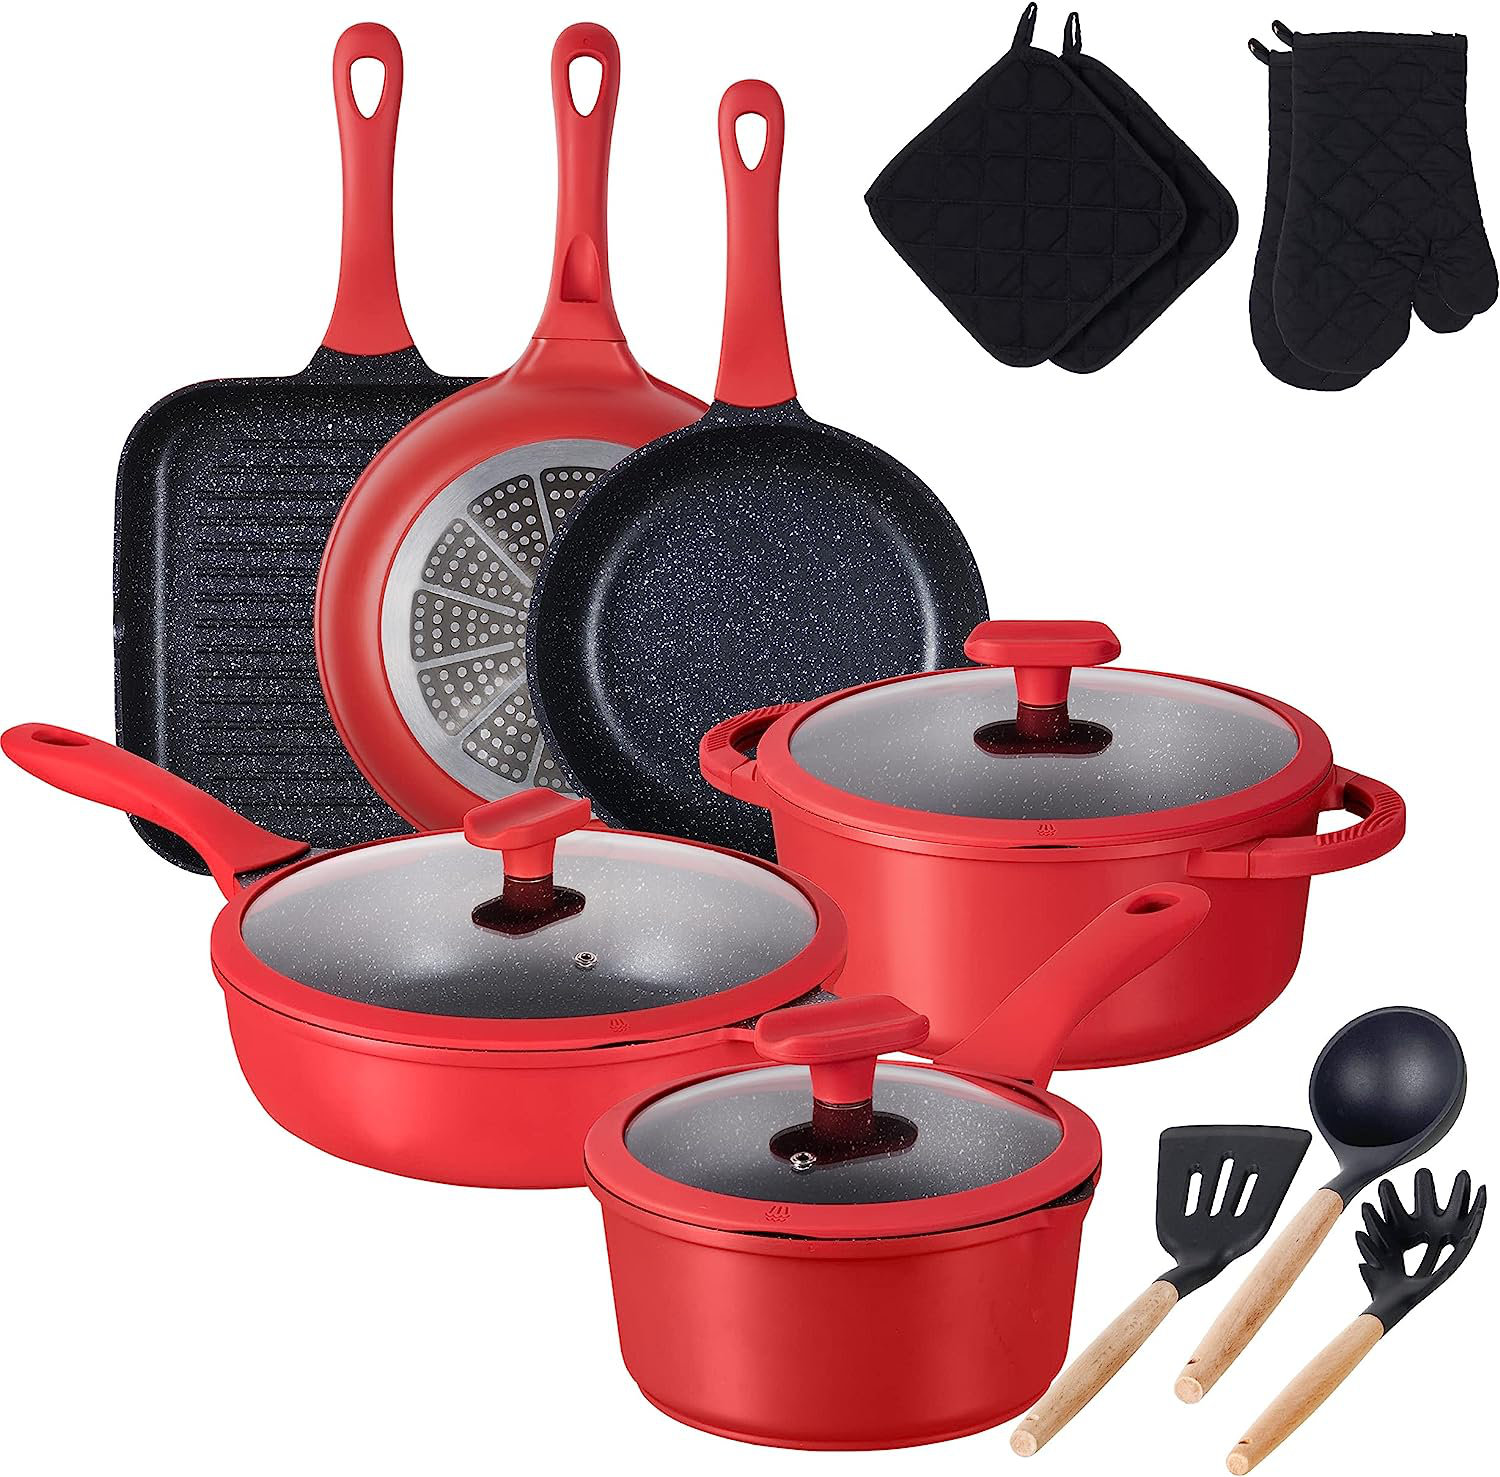 IMARKU Non Stick Frying Pans Review